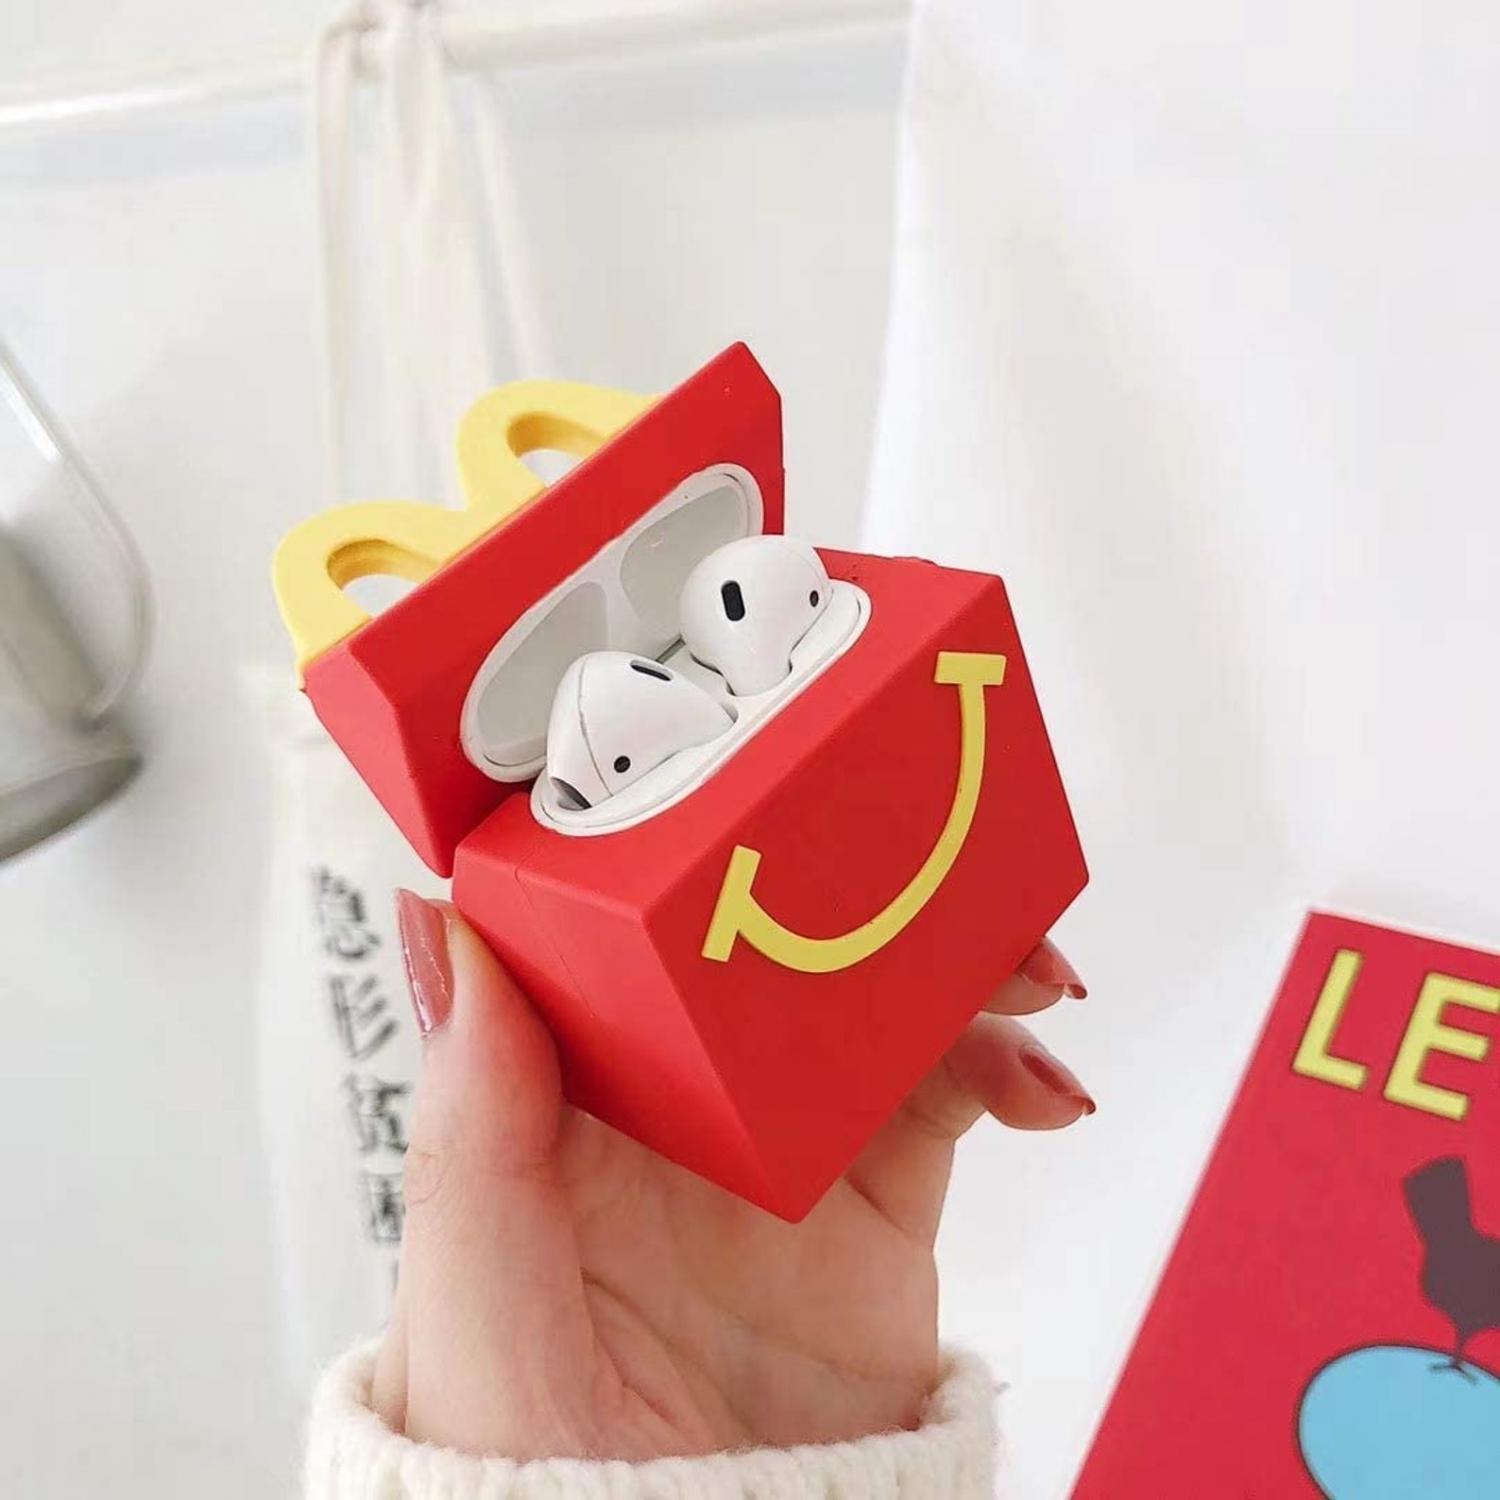 Mcdonalds Happy Meal airpod case